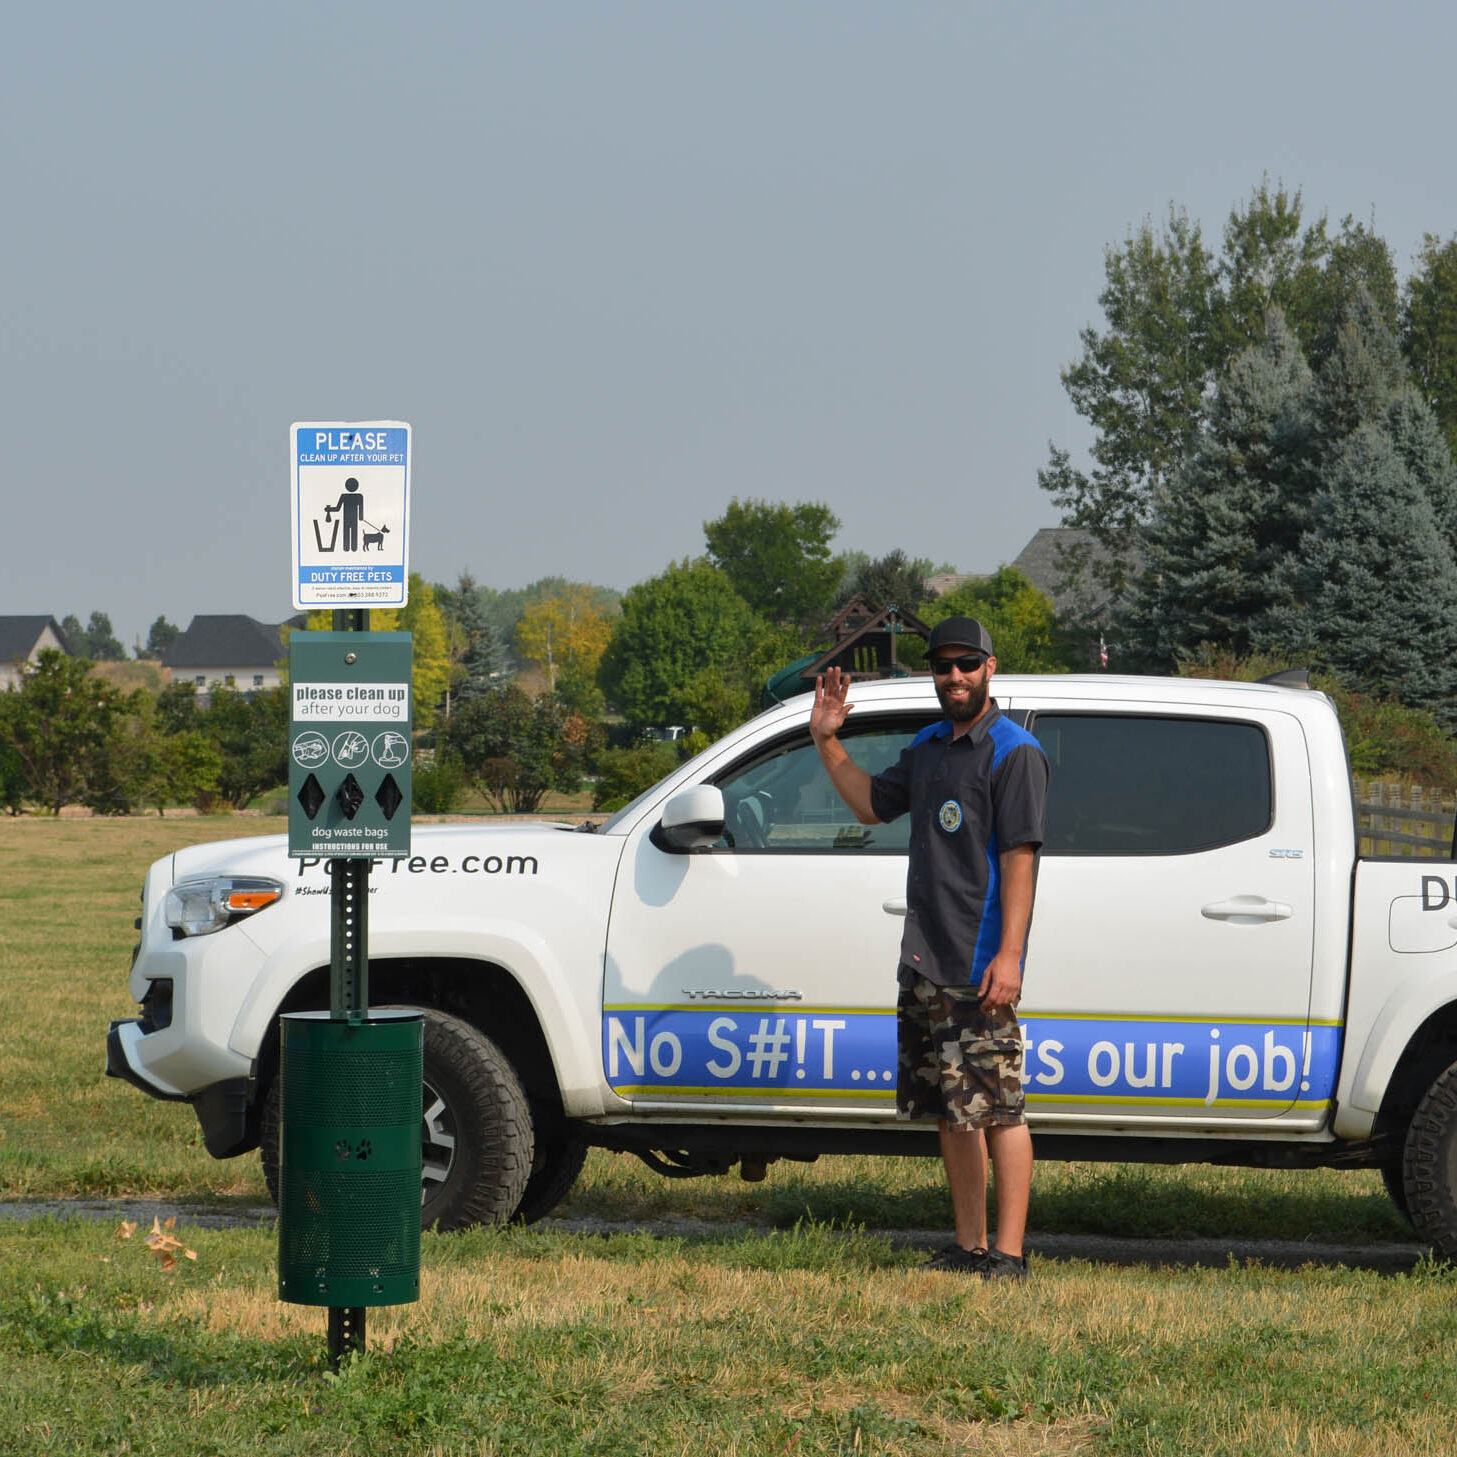 Efficient Duty Free Pets employee diligently clearing dog waste in scenic Johnstown, Colorado, ensuring a cleaner environment for all one pooper scooper service ata time